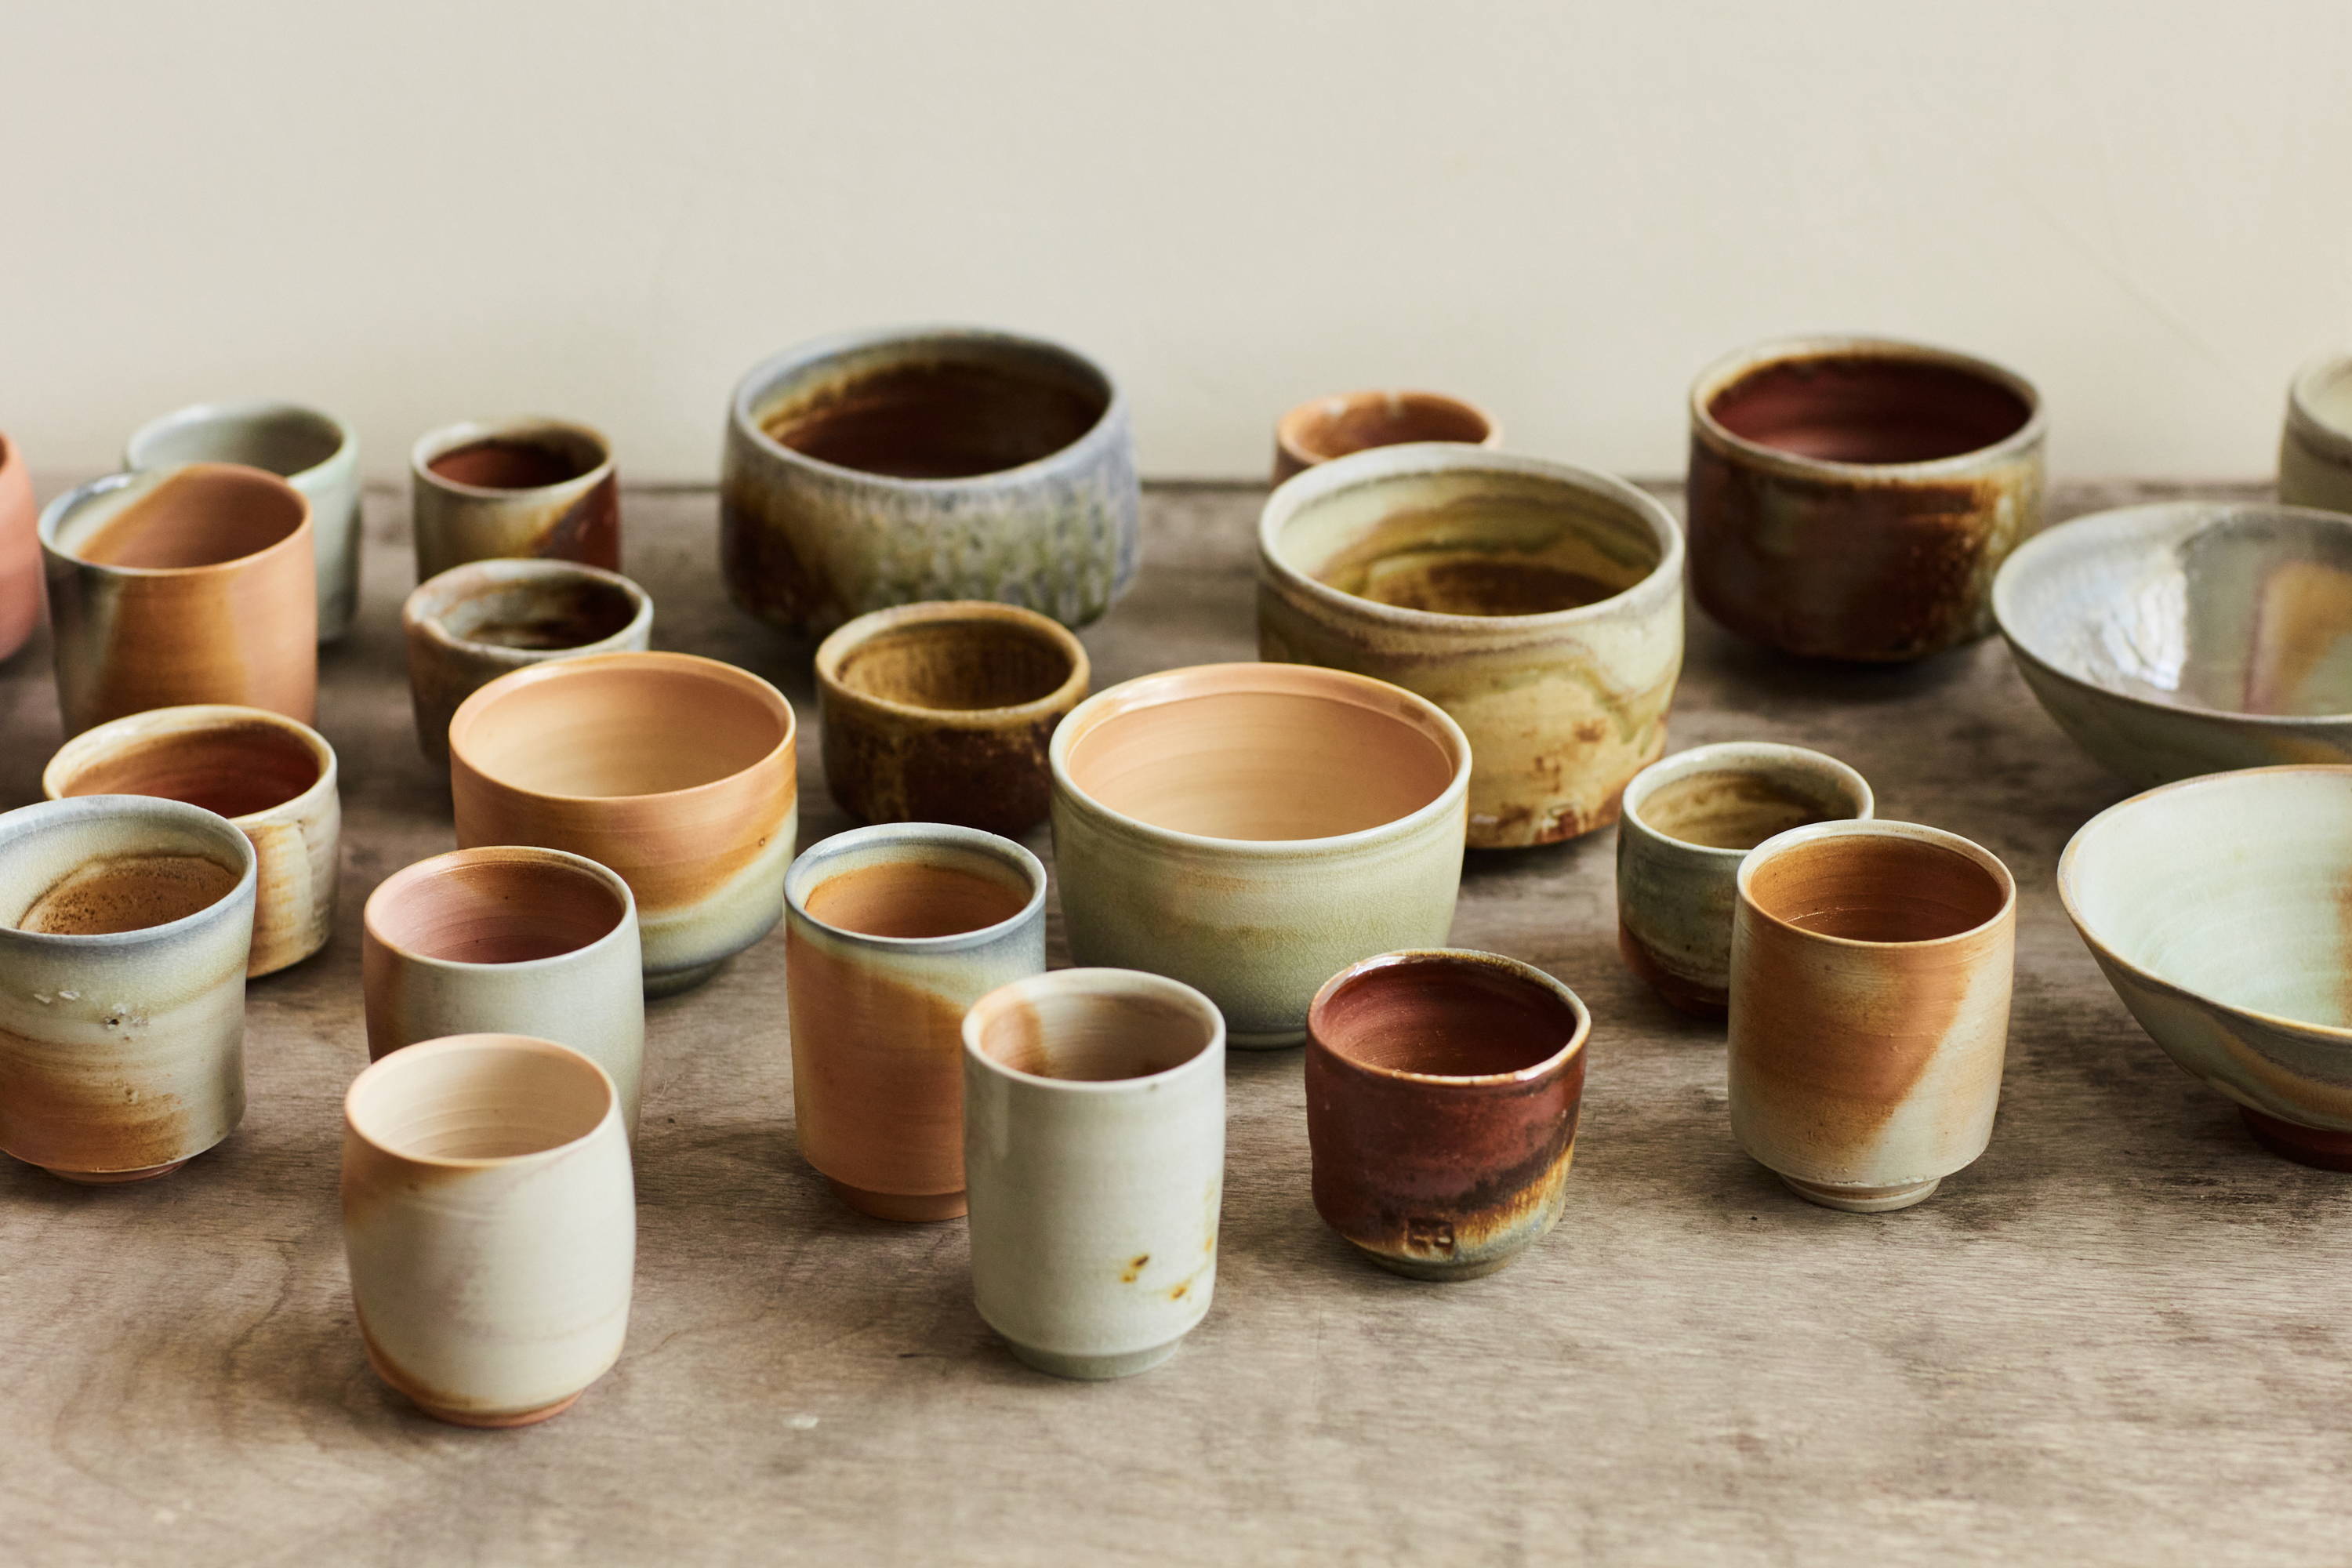 Collection of wood-fired tea cups and bowls on a wood table